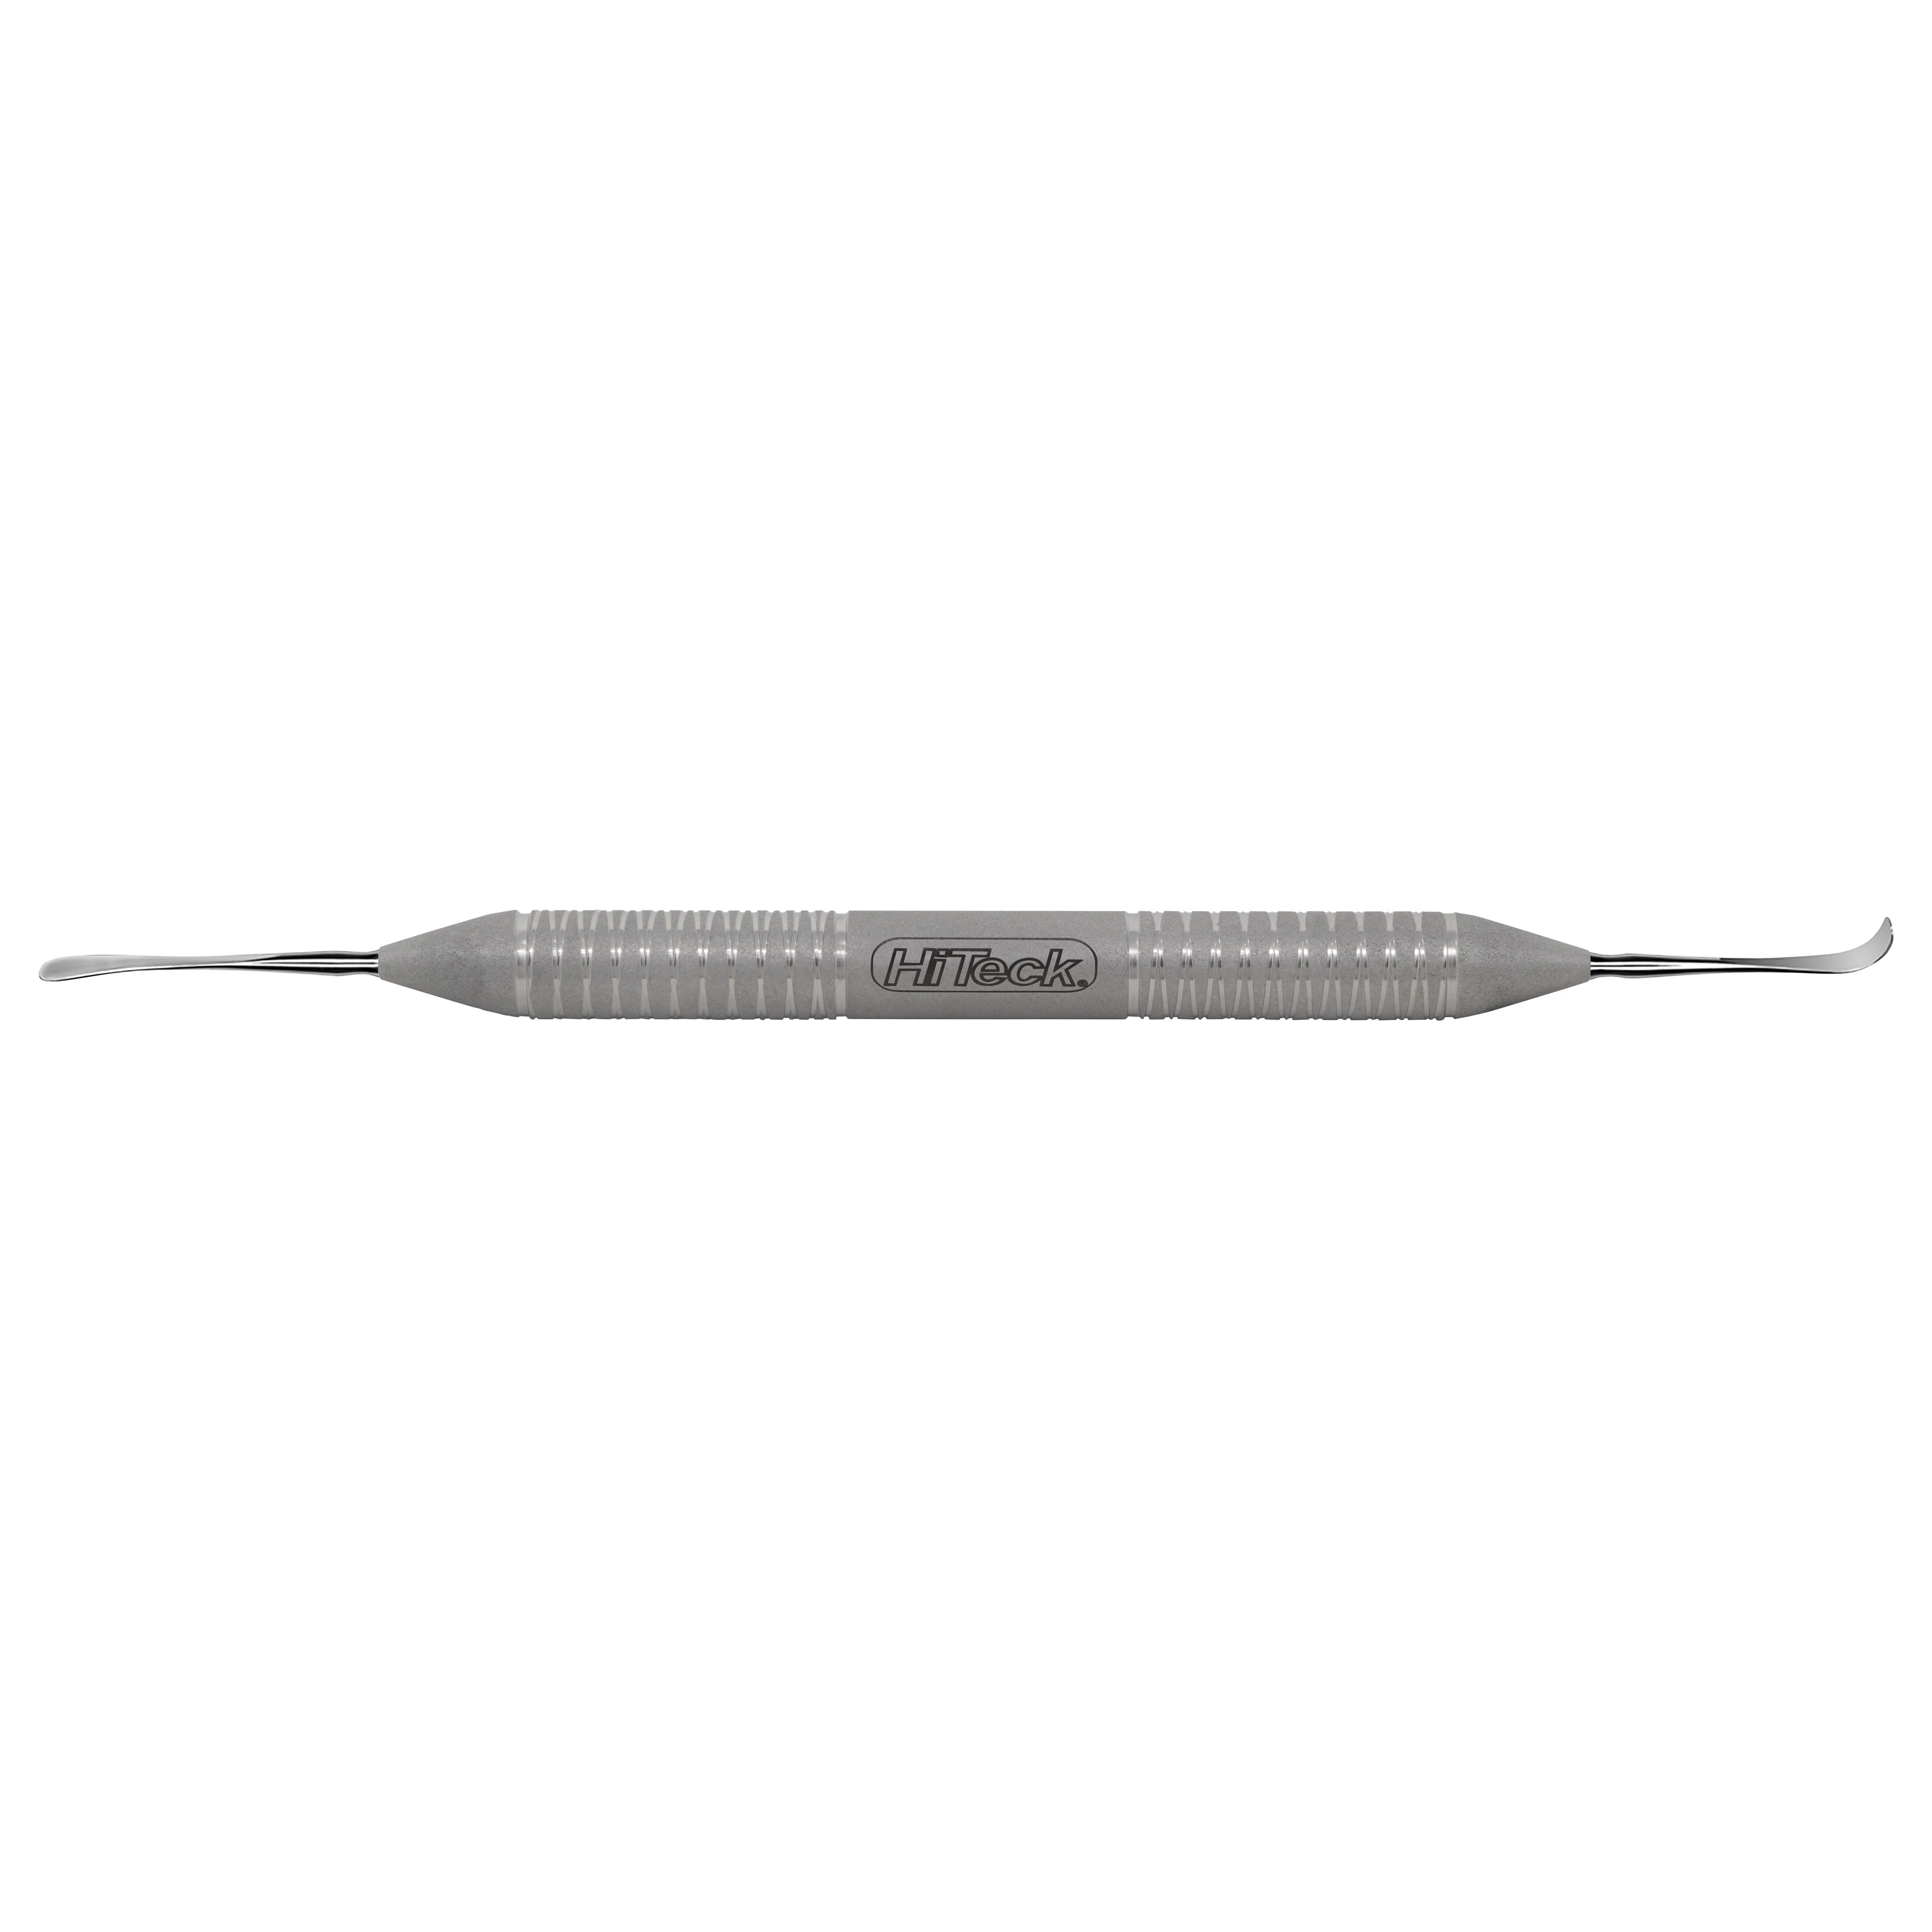 16 Freer Strongly Curved Periosteal - HiTeck Medical Instruments